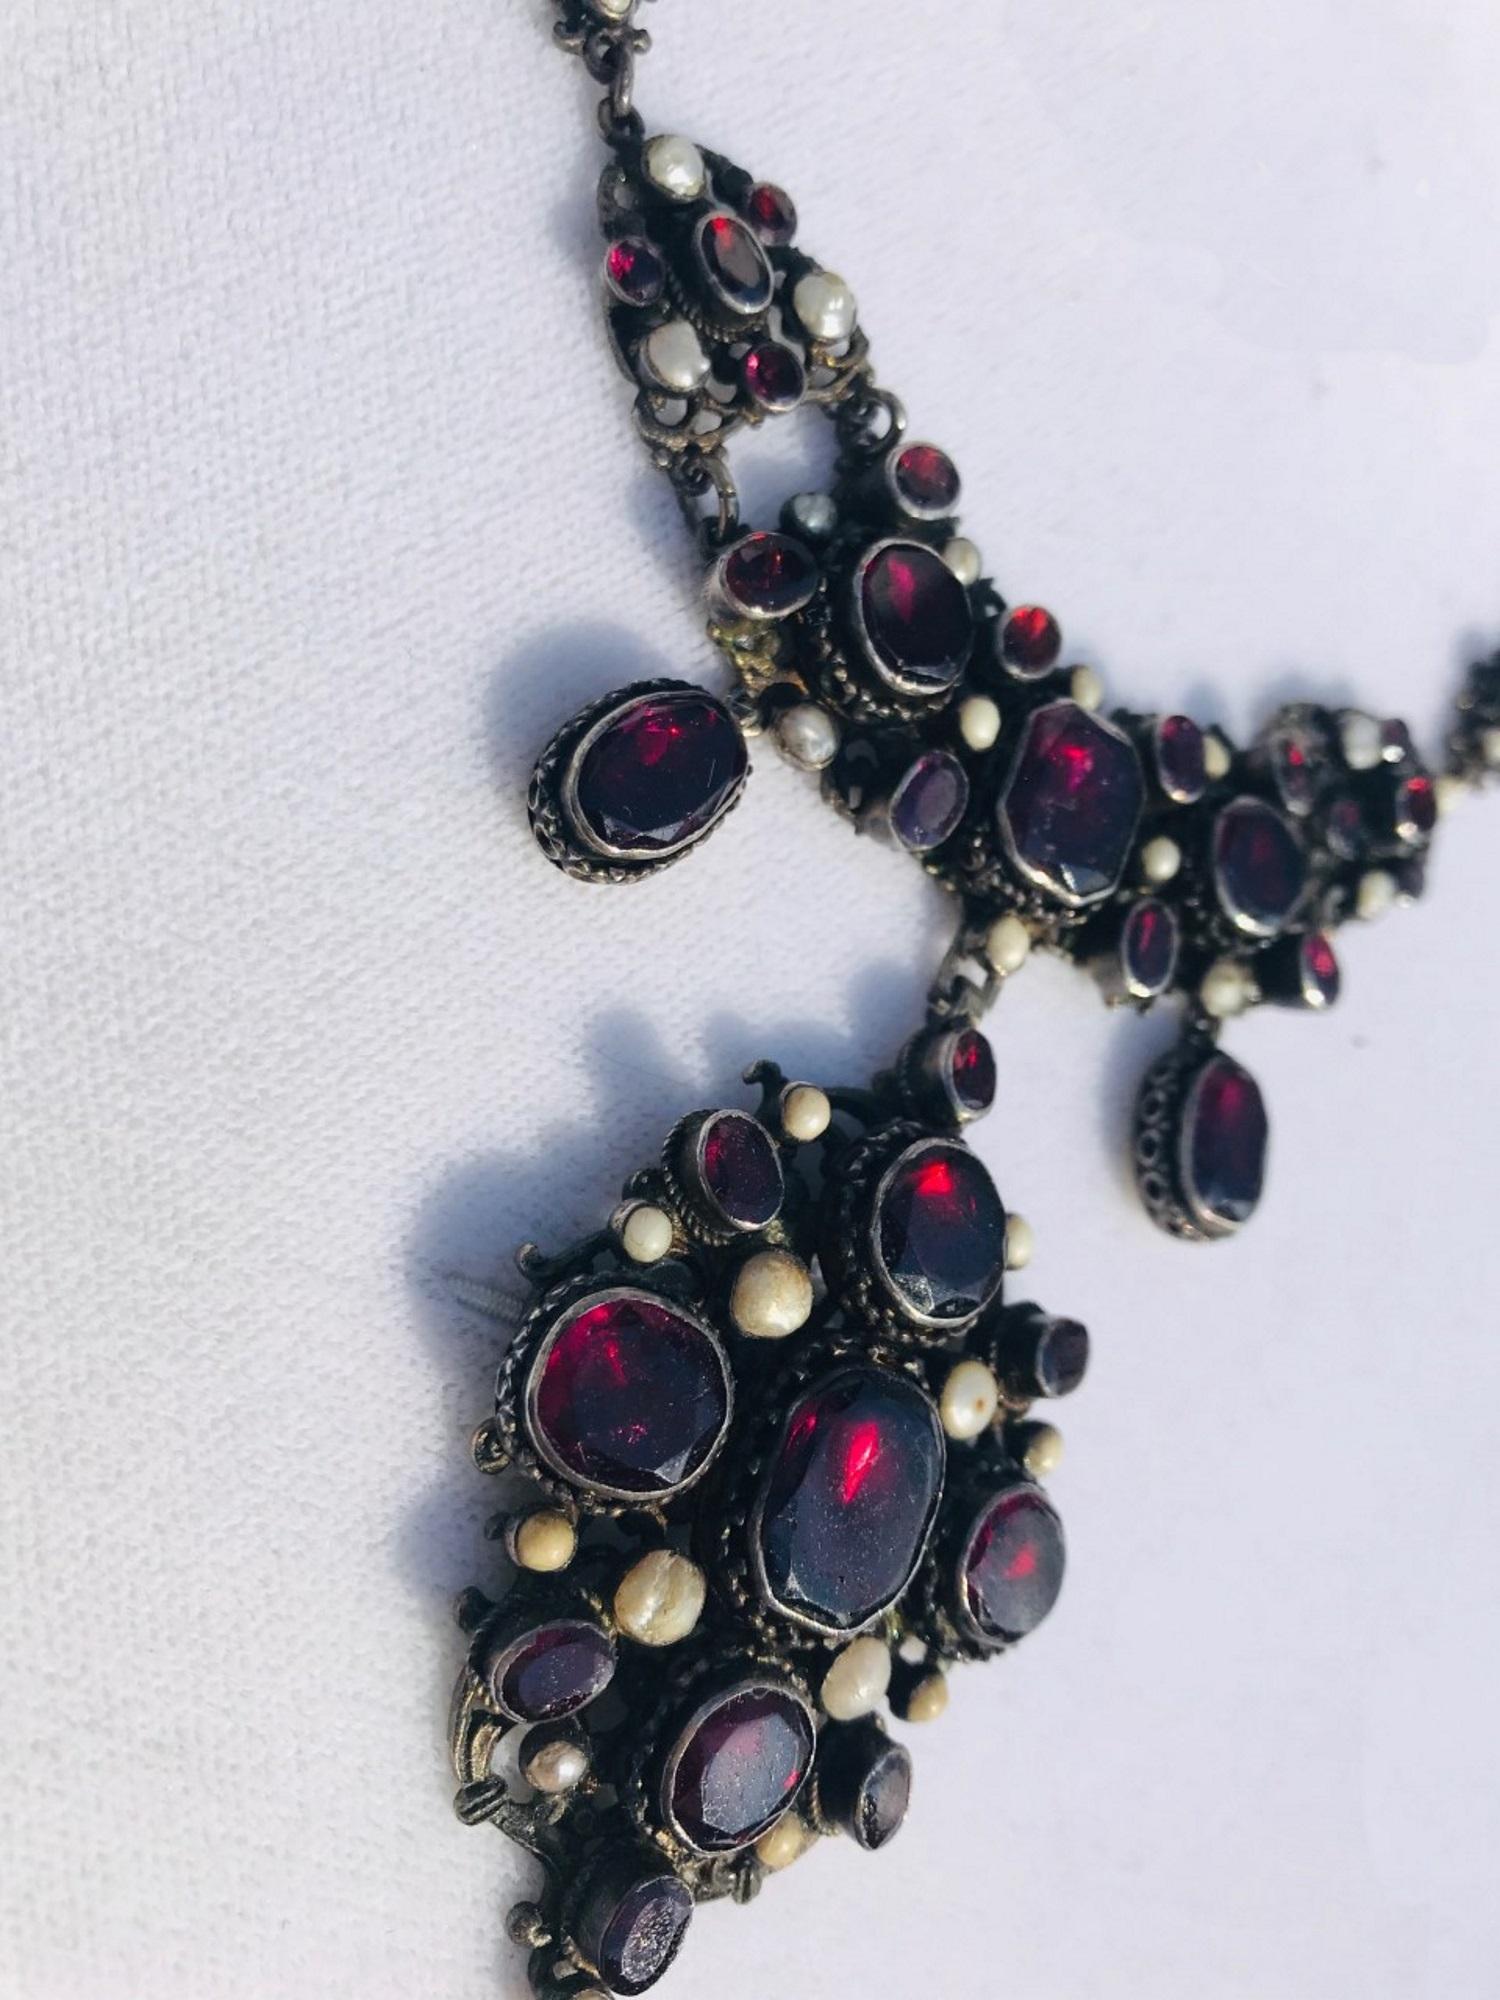 19th Century Victorian English Bib Necklace Garnets with Pearl Accents, circa 1870 For Sale